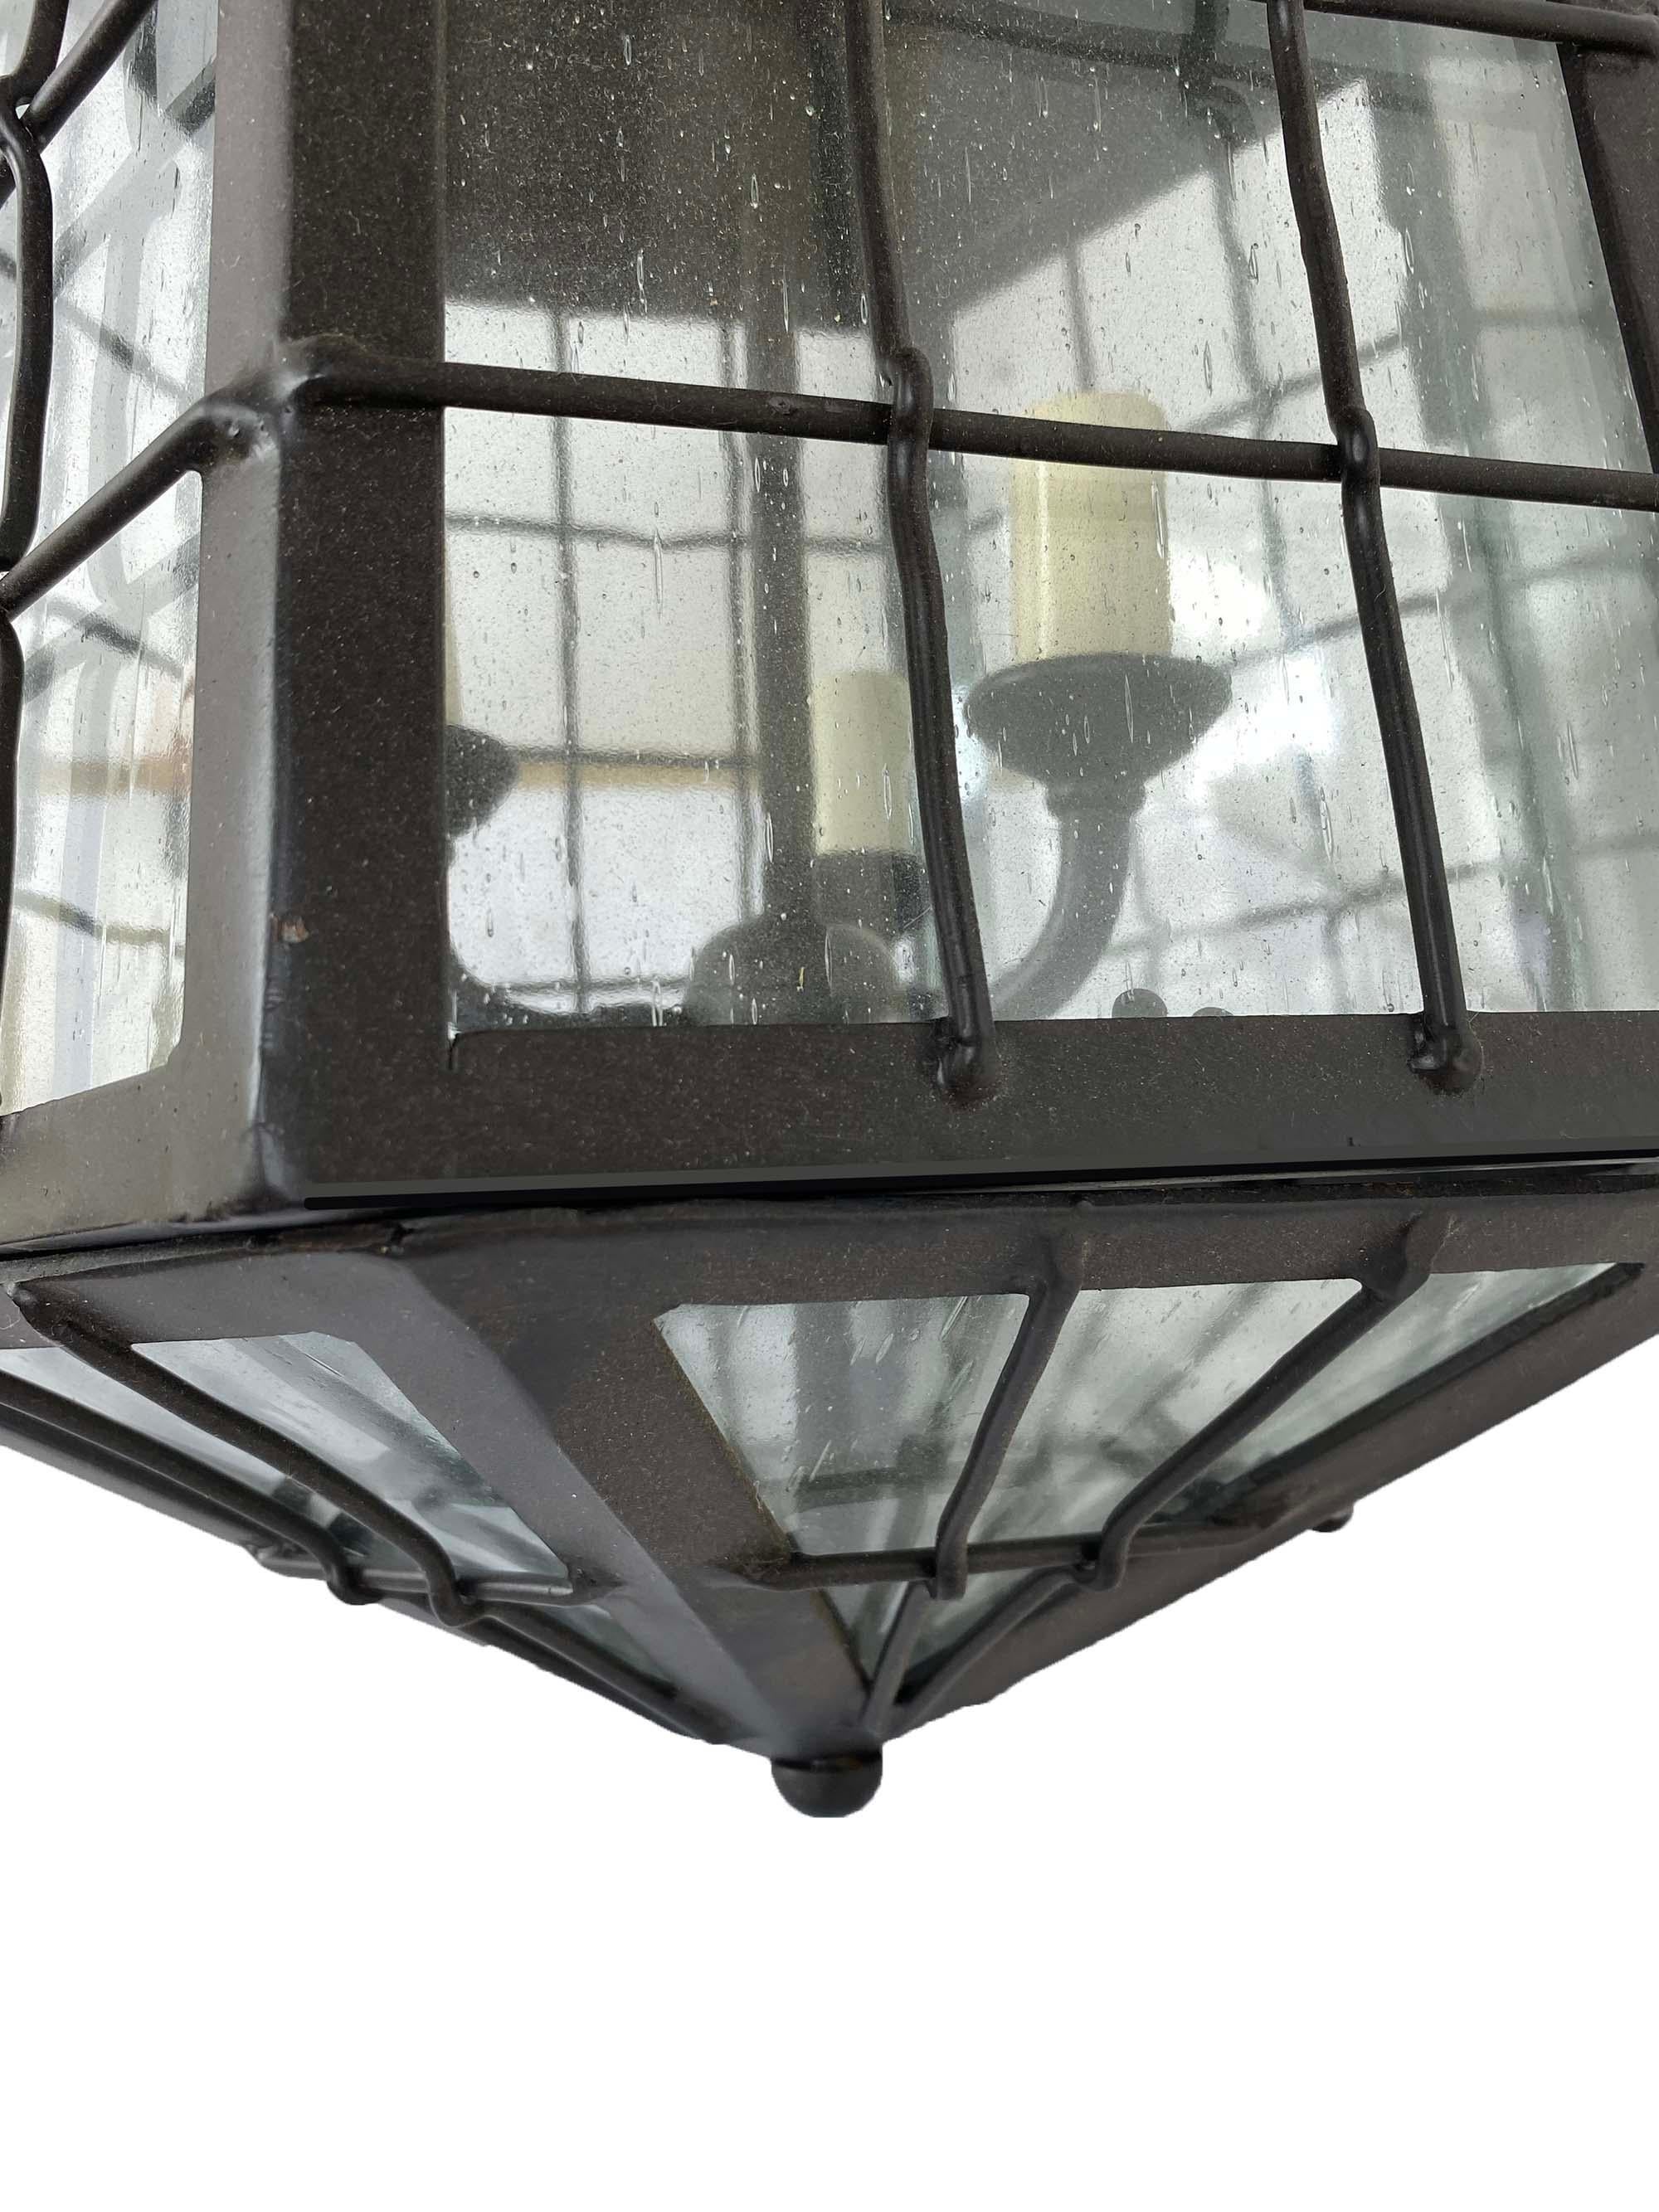 This wrought iron lantern was inspired by a Spanish Colonial house in Santa Barbara. It is also in the style of ships lanterns on the 19th century. The intricate woven cage and tapered shape make it quite interesting. This is a new lantern that can